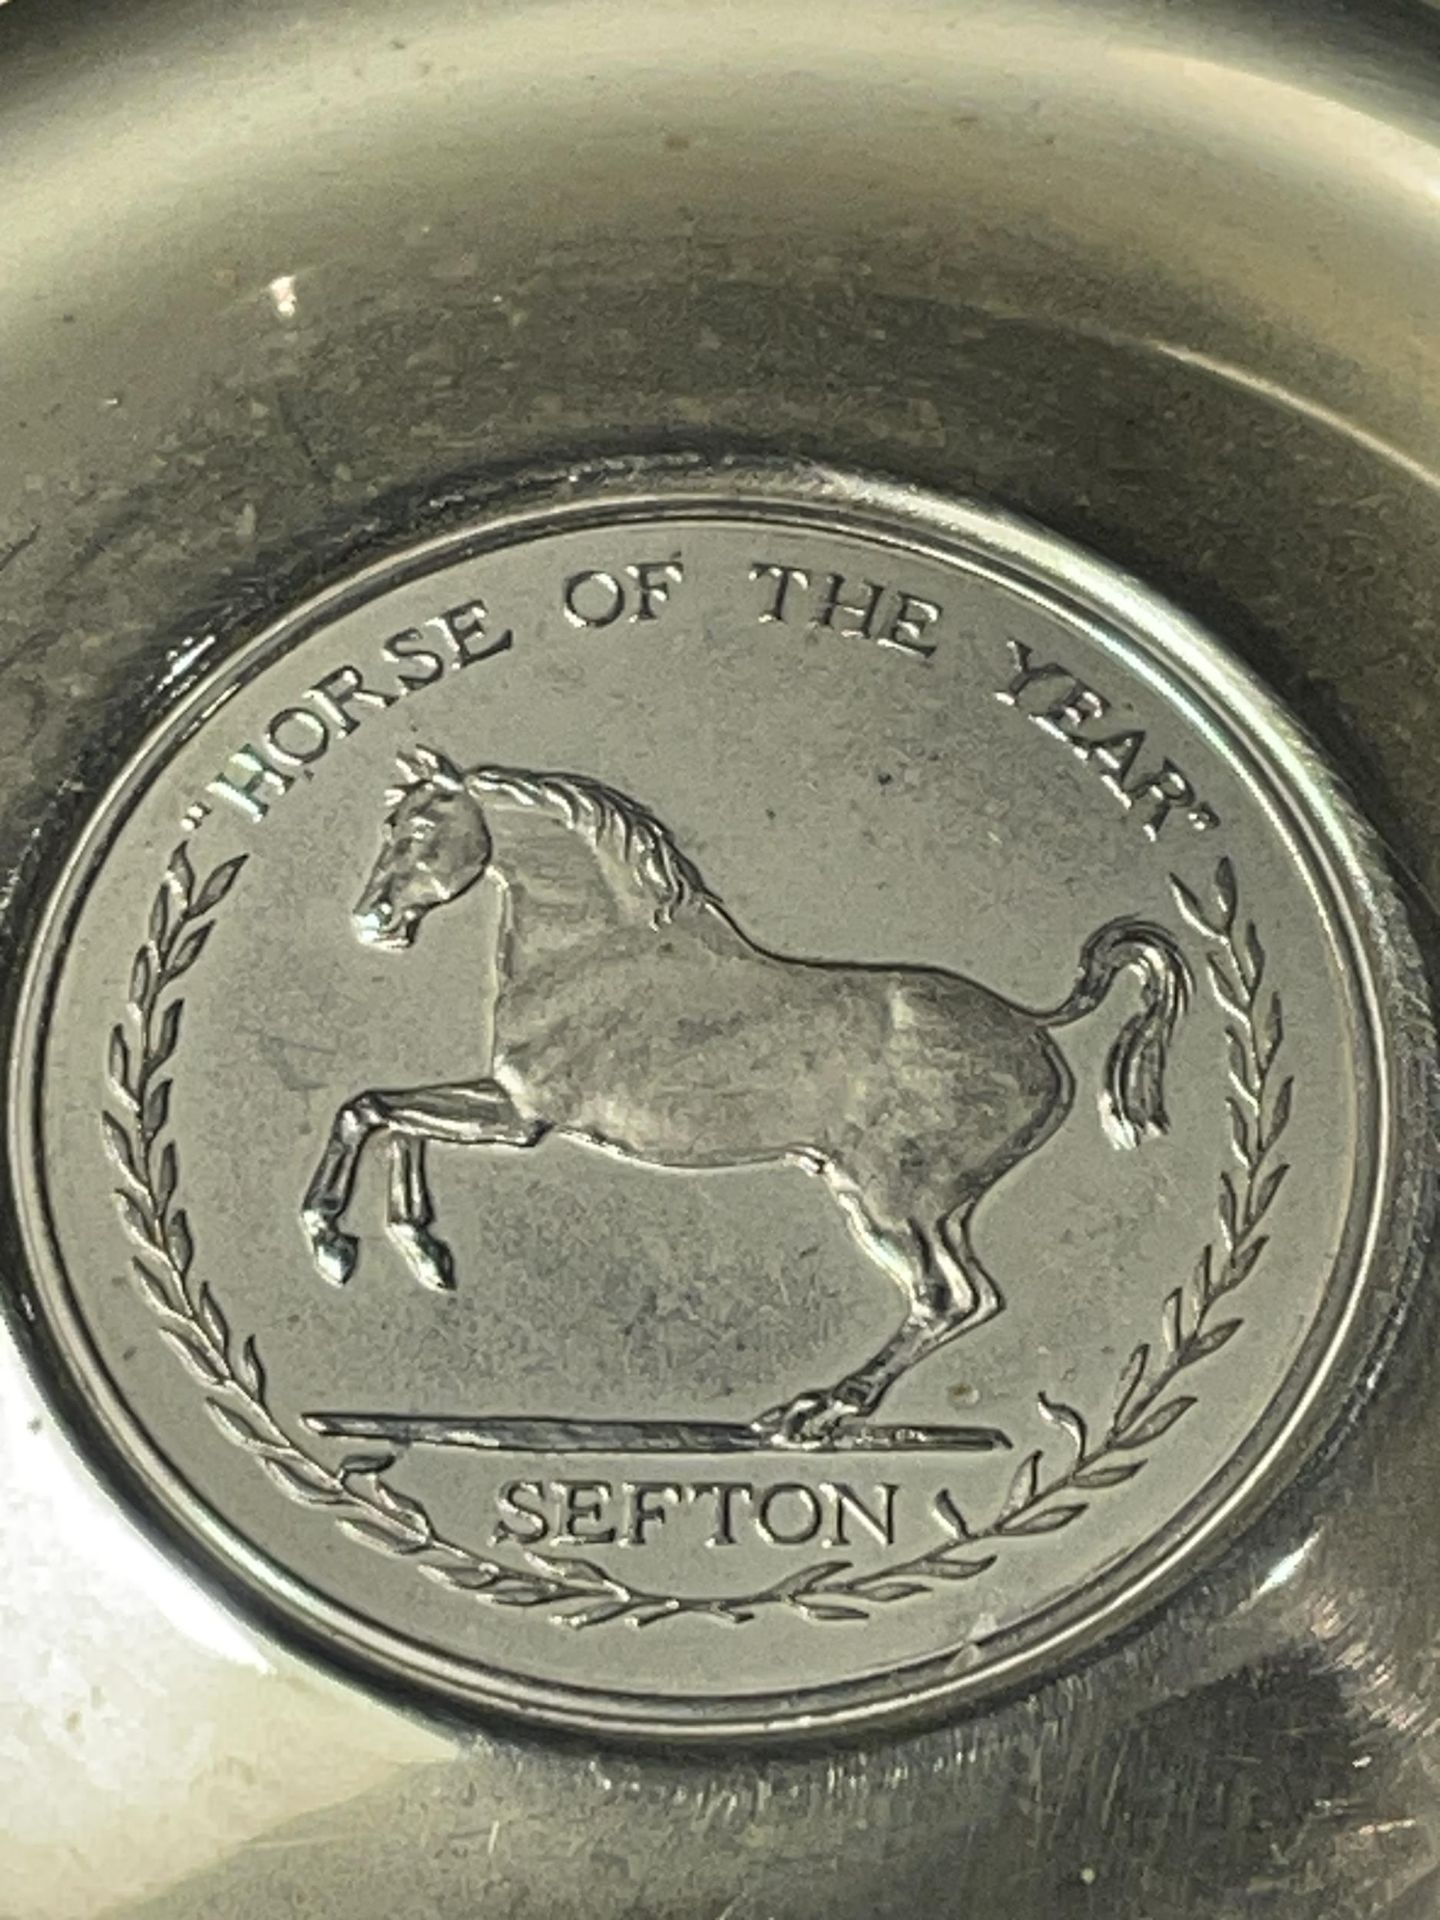 A SEFTON HORSE OF THE YEAR 1982 SILVER PLATED DISH - Image 2 of 4